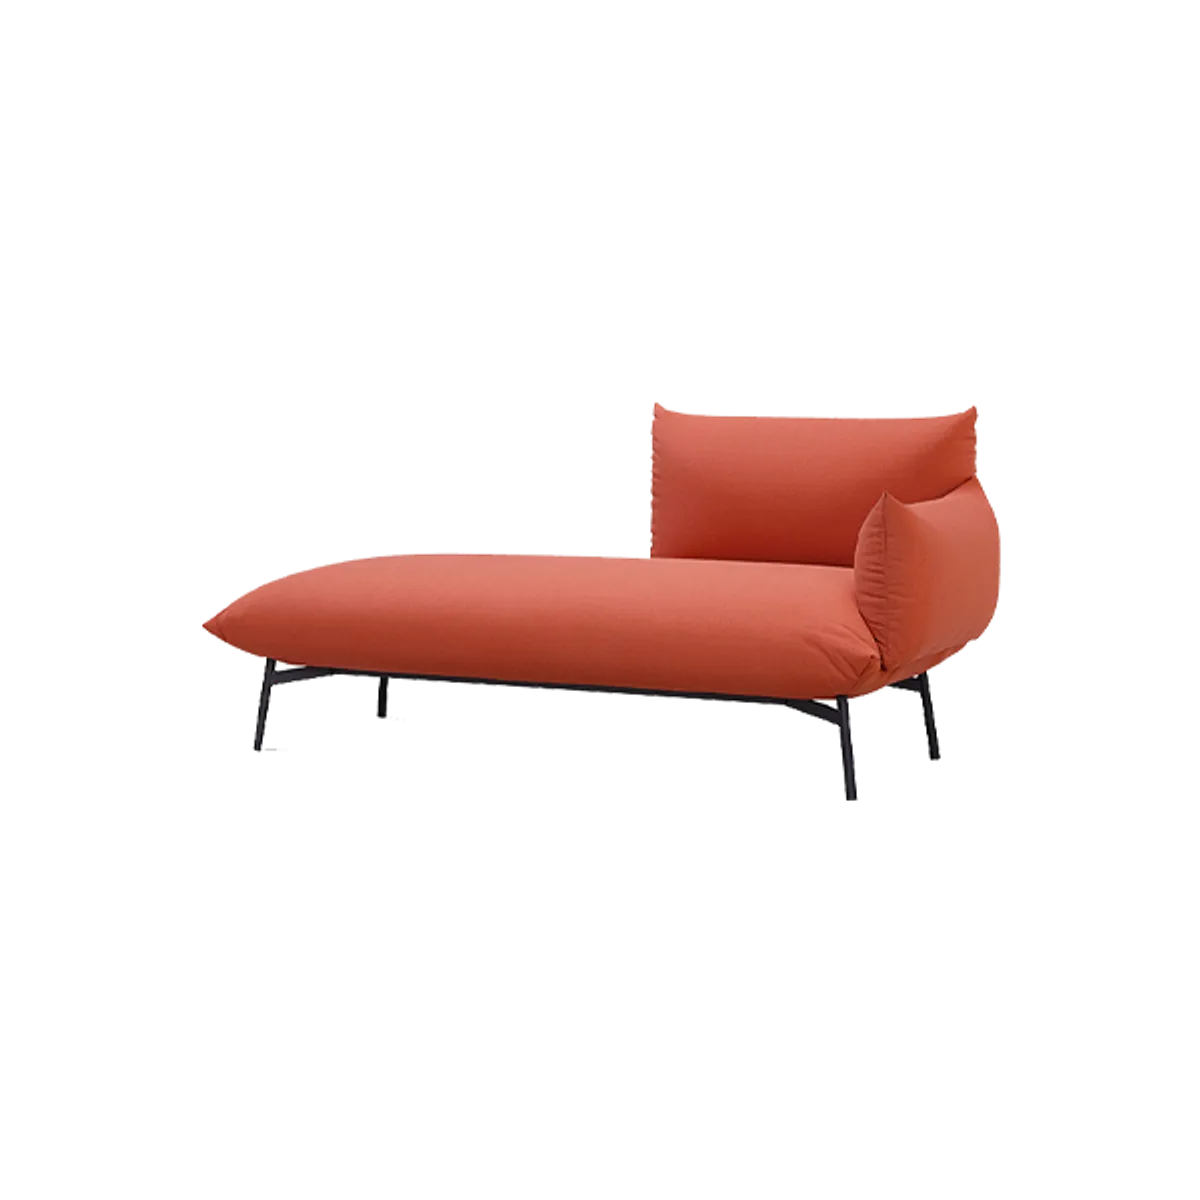 Area chaise longue Inside Out Contracts